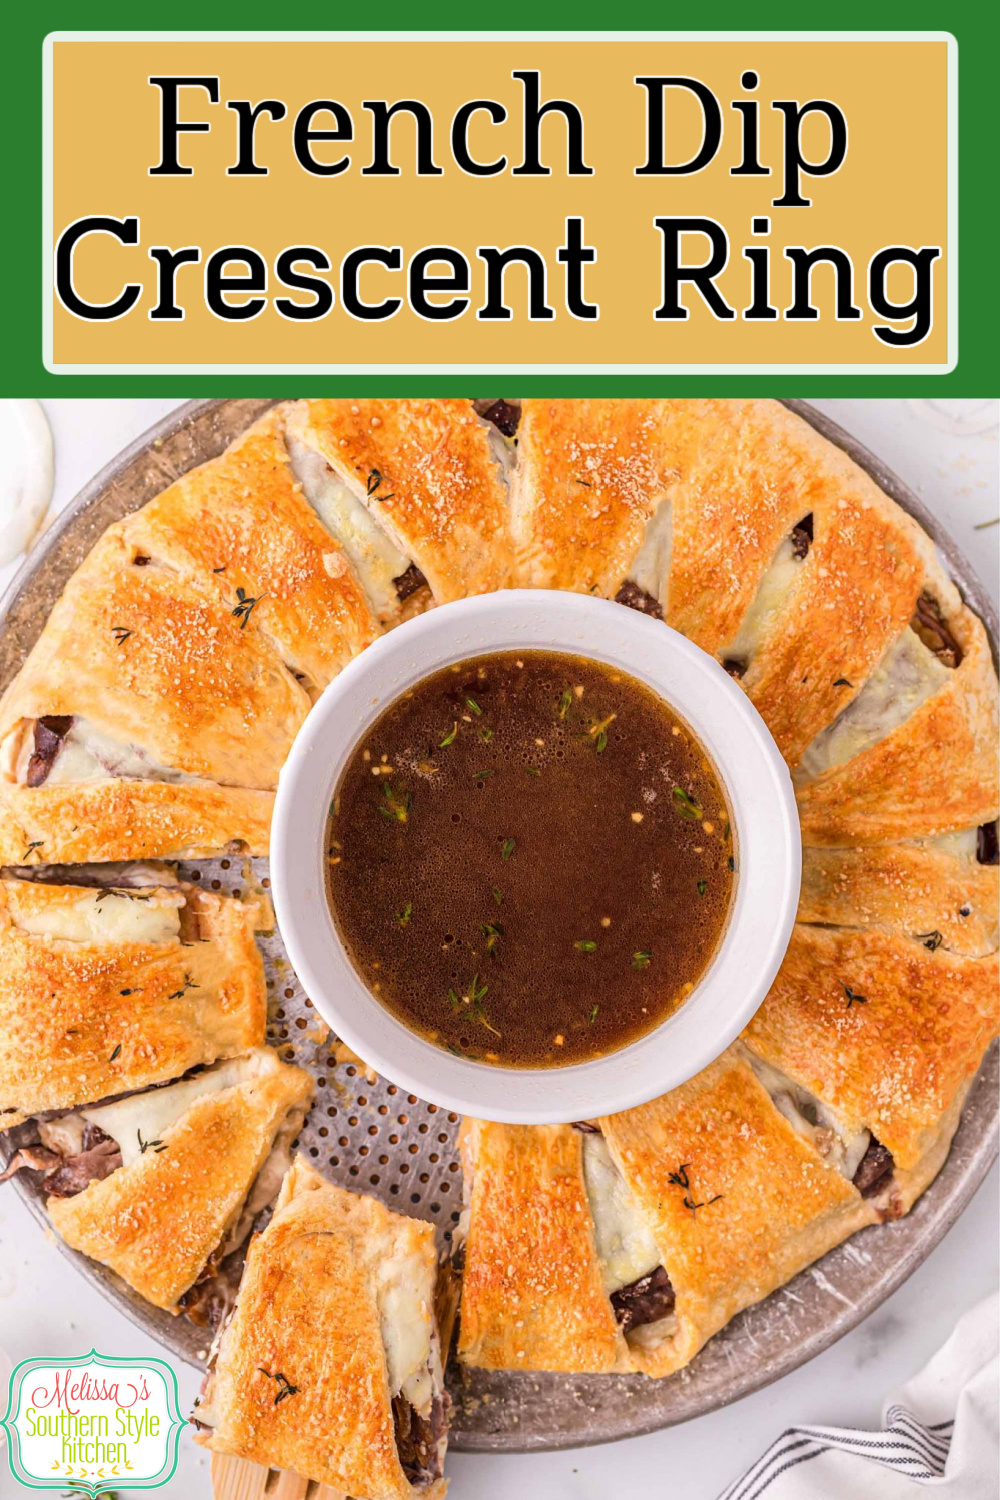 Serve French dips in an unexpected way with this French Dip Crescent Ring topped caramelized onions and au jus for dipping #frenchdips #roastbeef #frenchdiprecipes #crescentrings #crescentrolls #crescentrollrecipes #southernstyle #appetizers #gamedayrecipes via @melissasssk